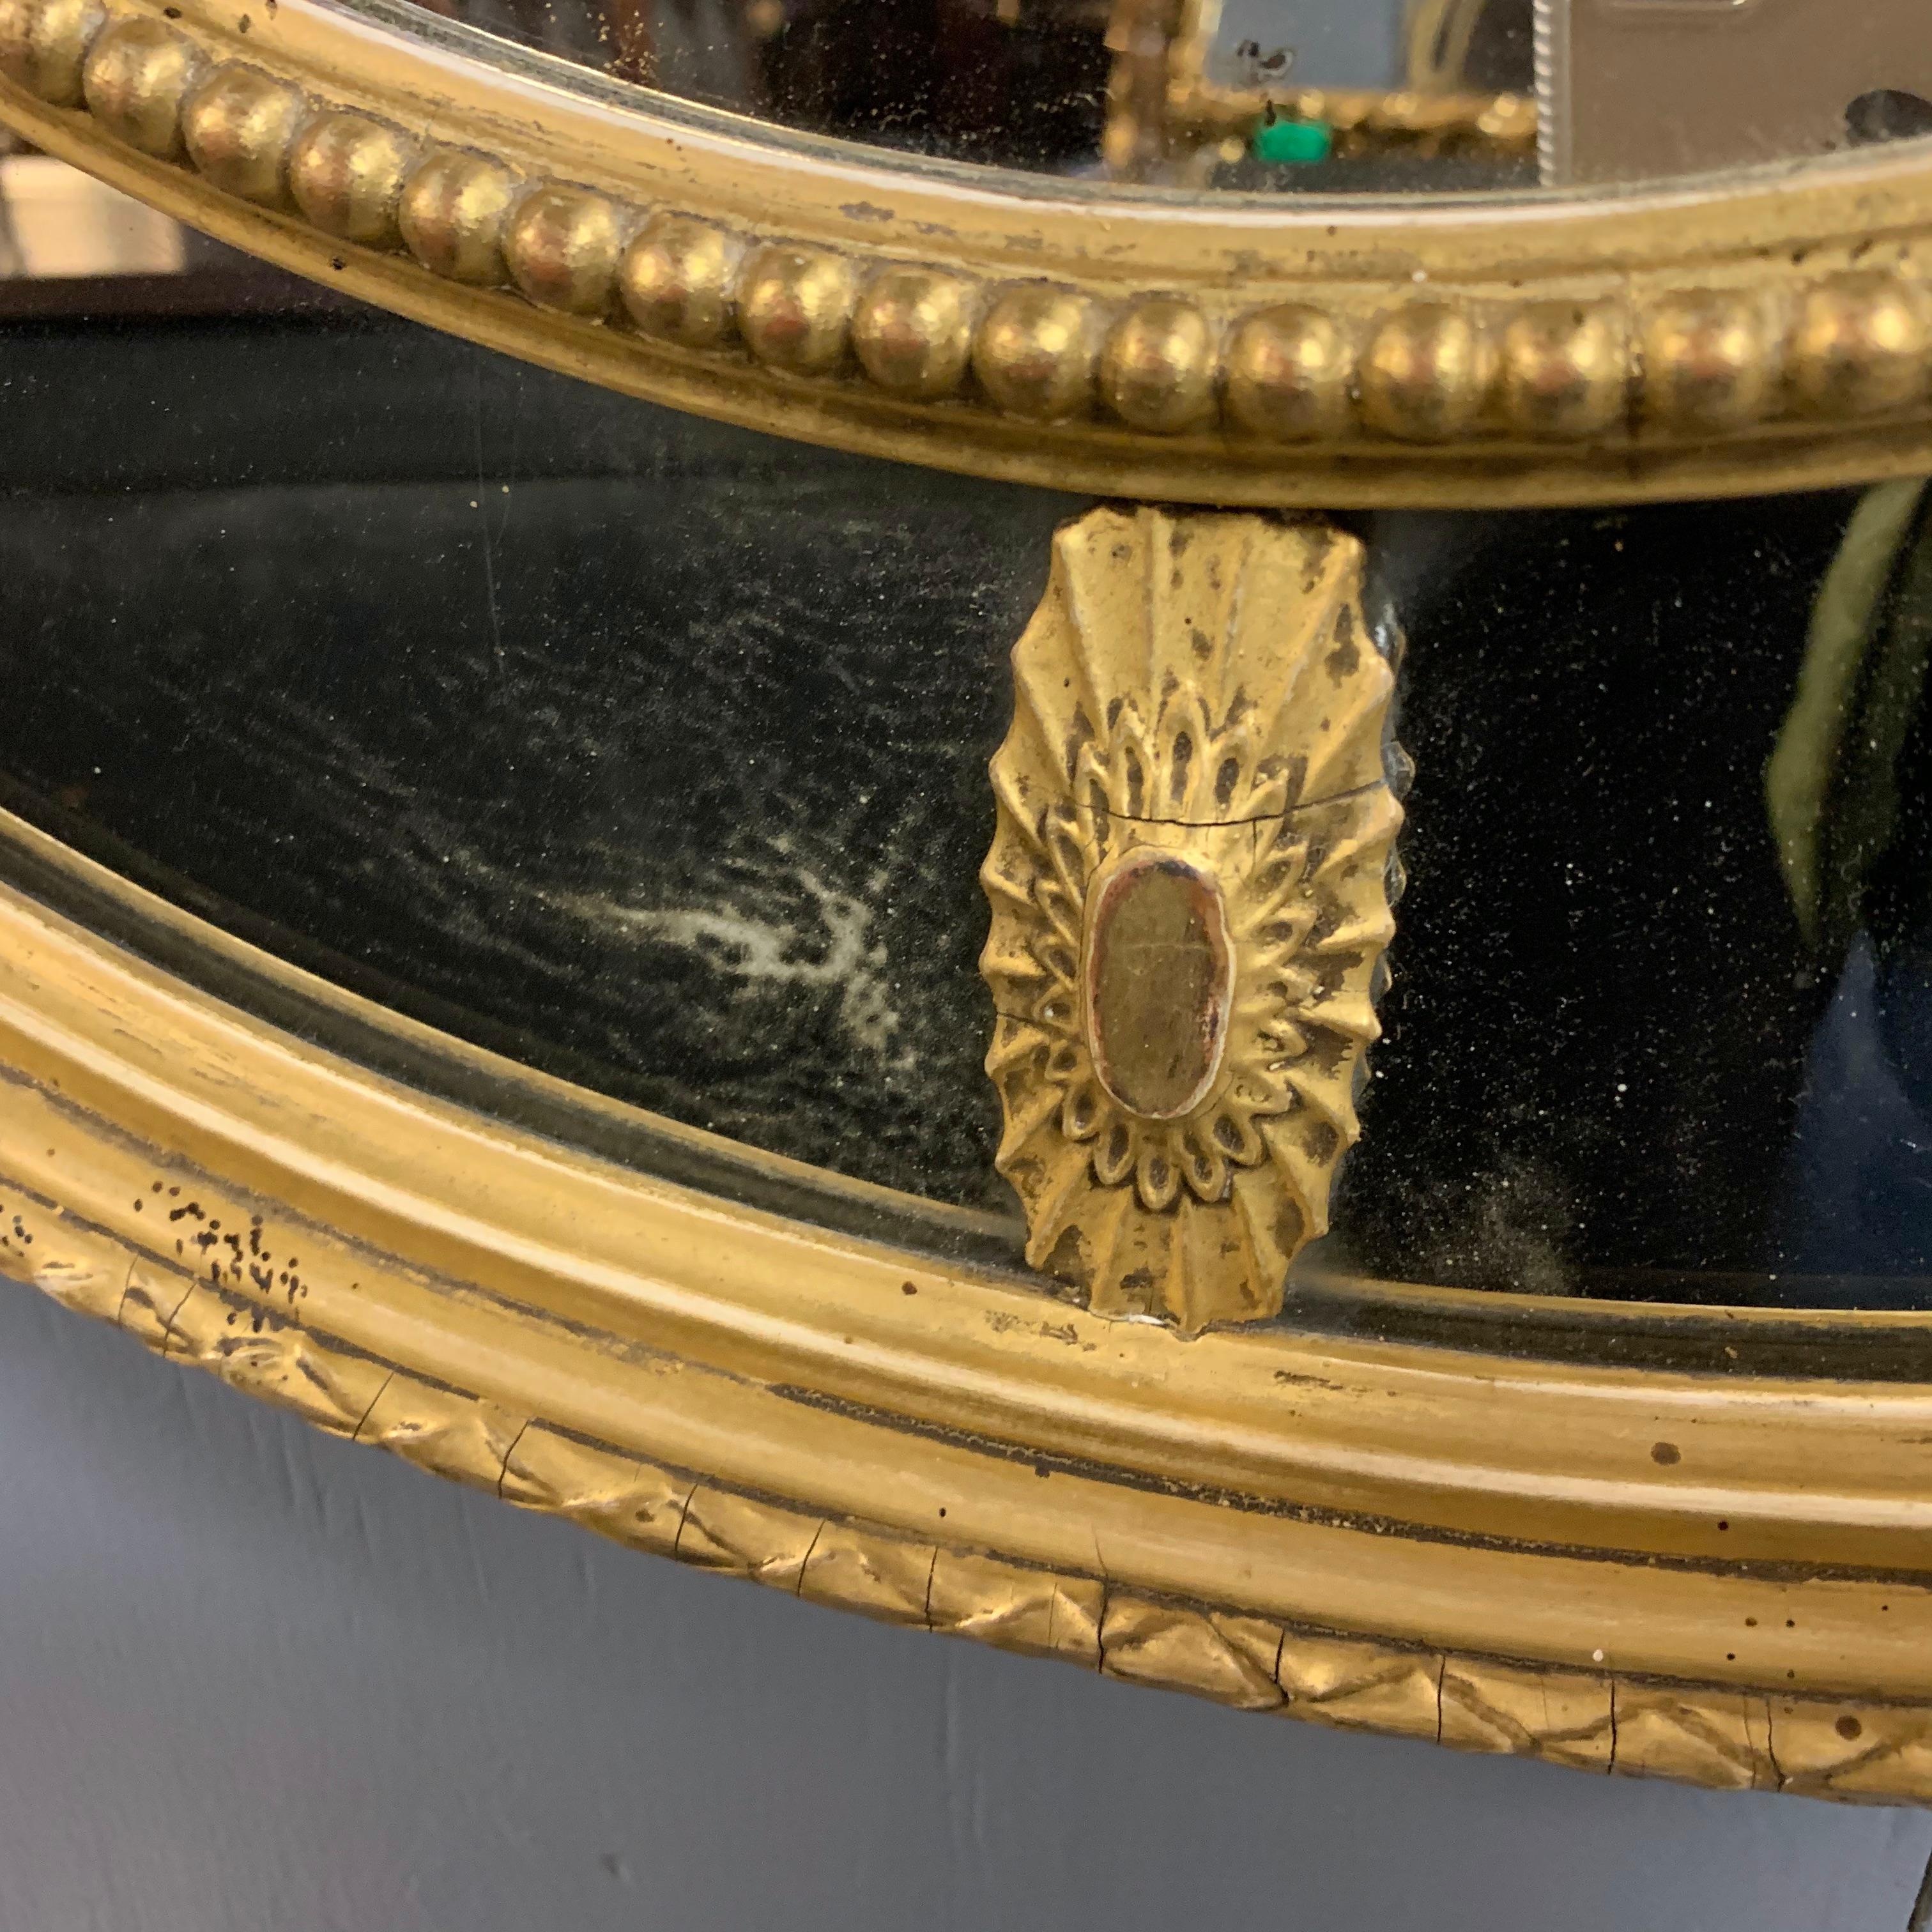 Pine 19th Century Adams Style Oval Gilt Mirror with Tied Ribbons and Urn Decor